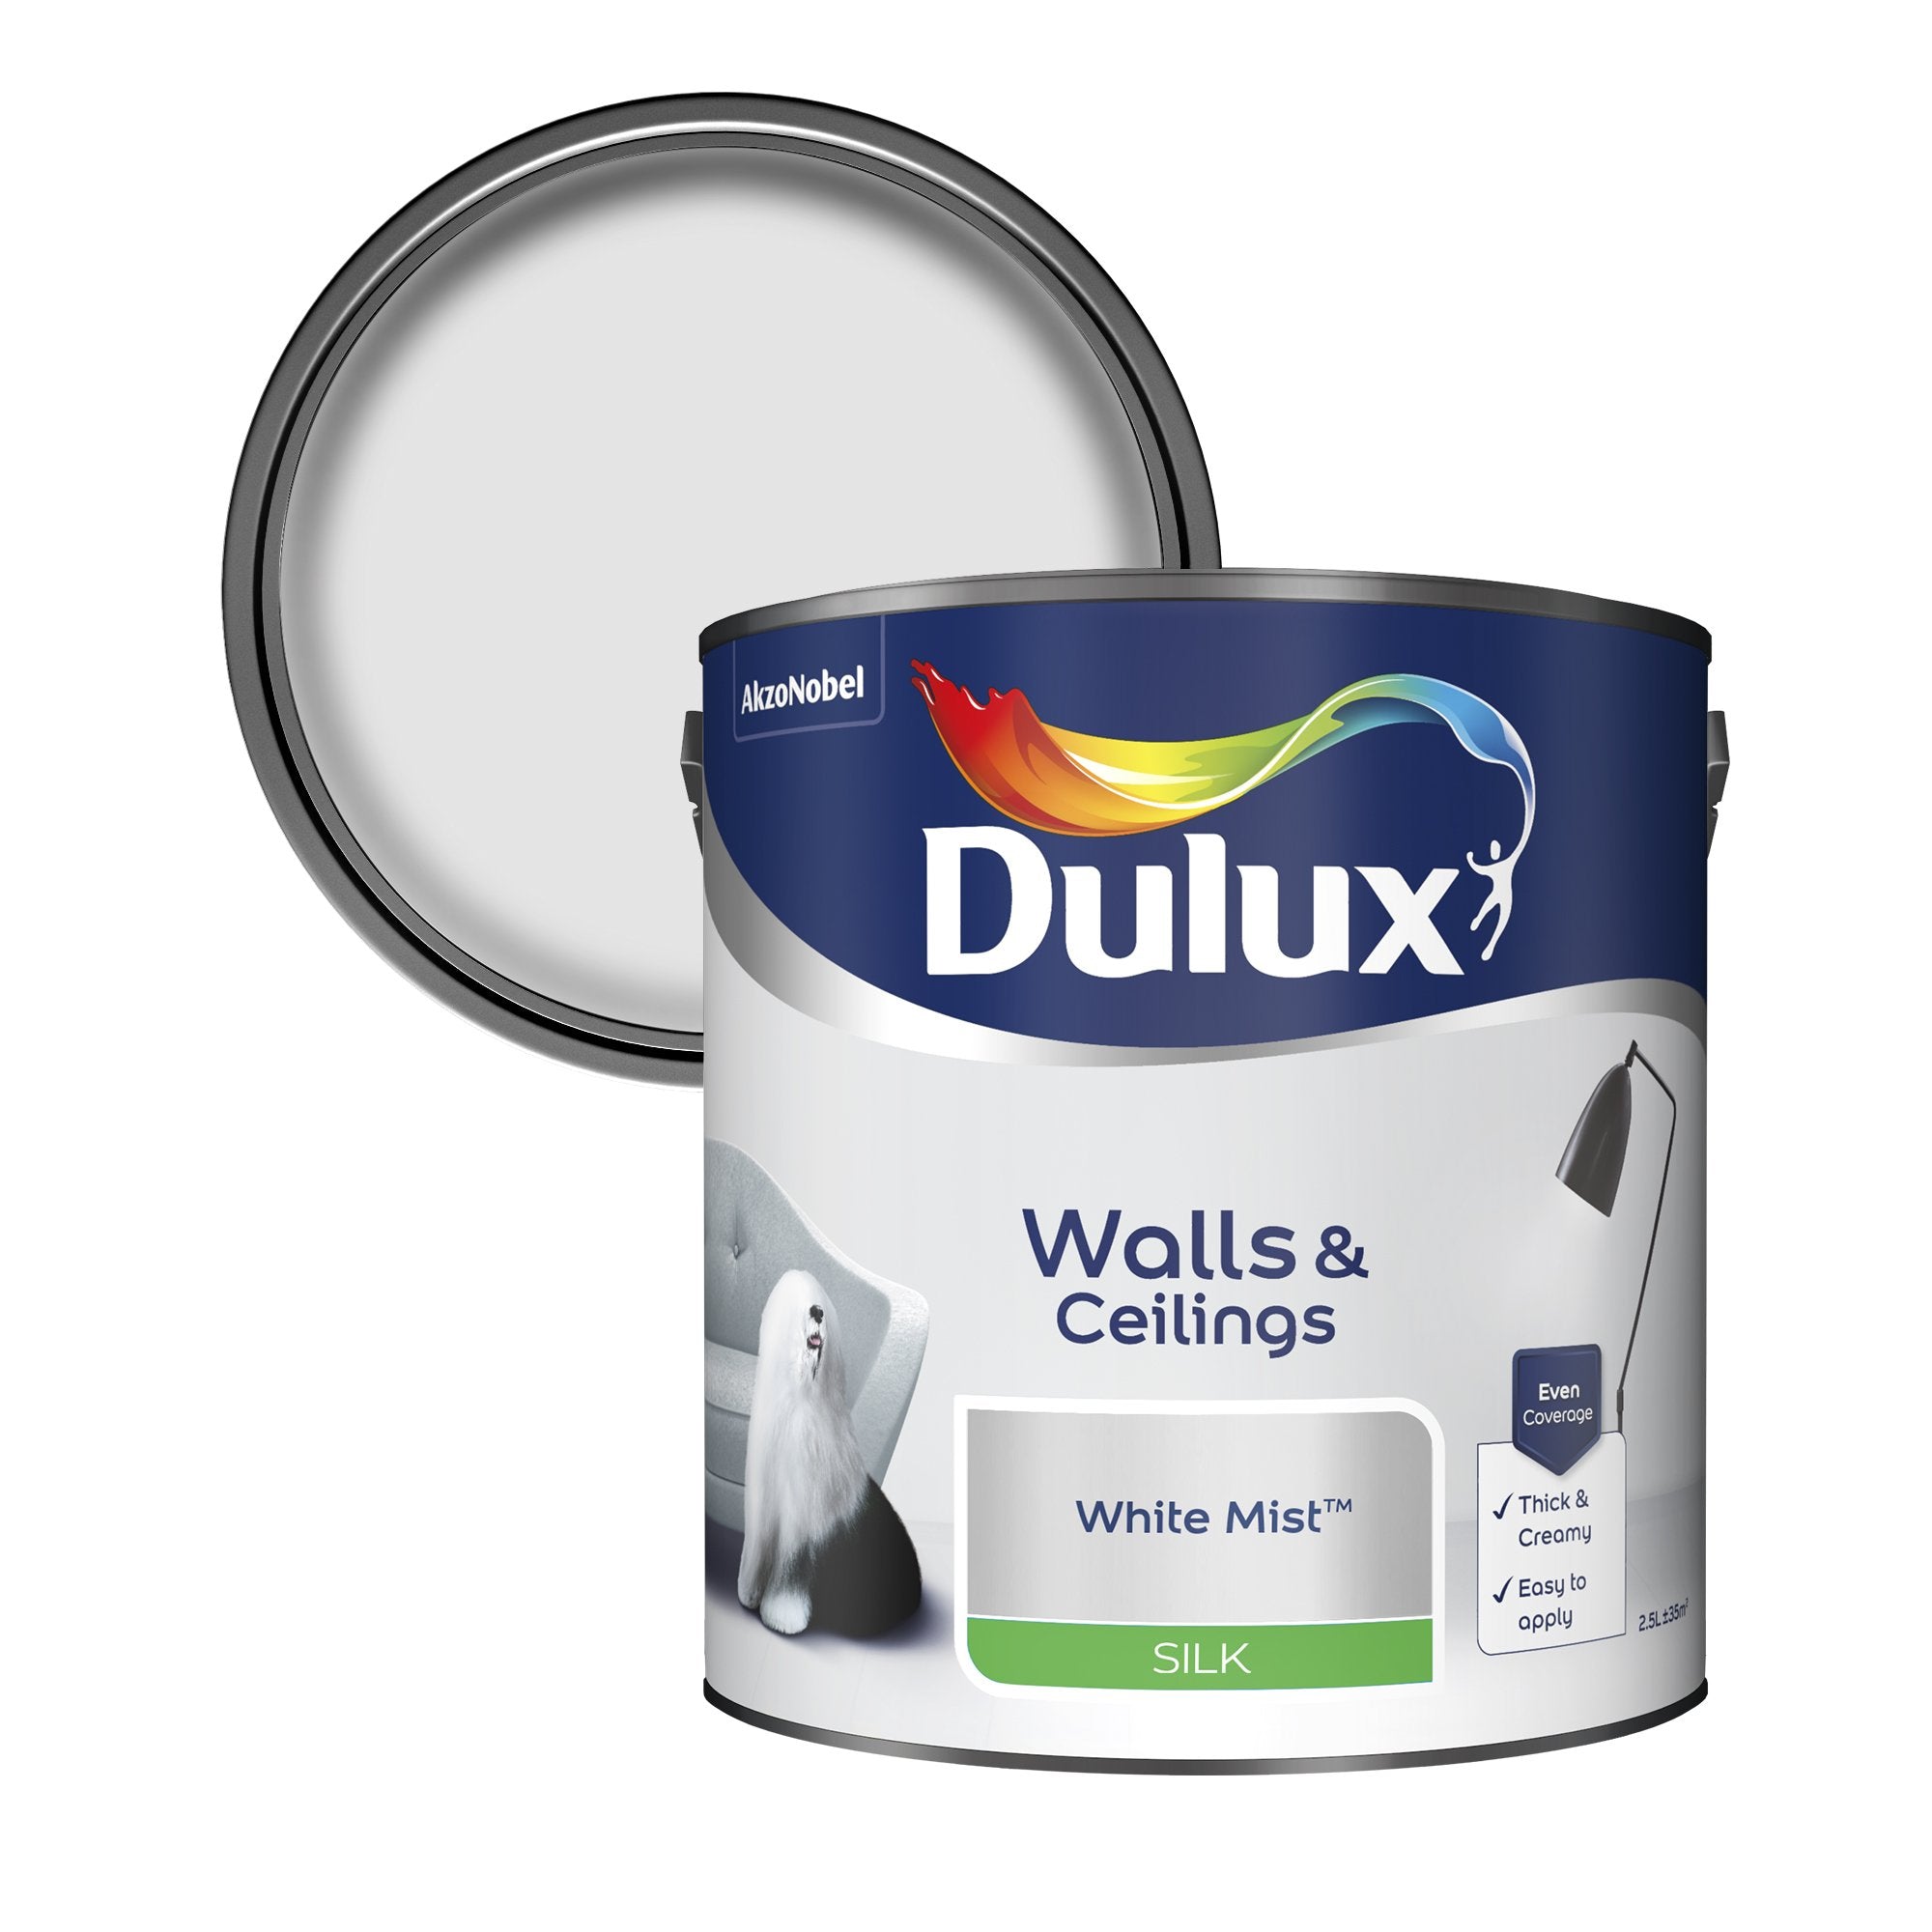 Dulux-Silk-Emulsion-Paint-For-Walls-And-Ceilings-White-Mist-2.5L